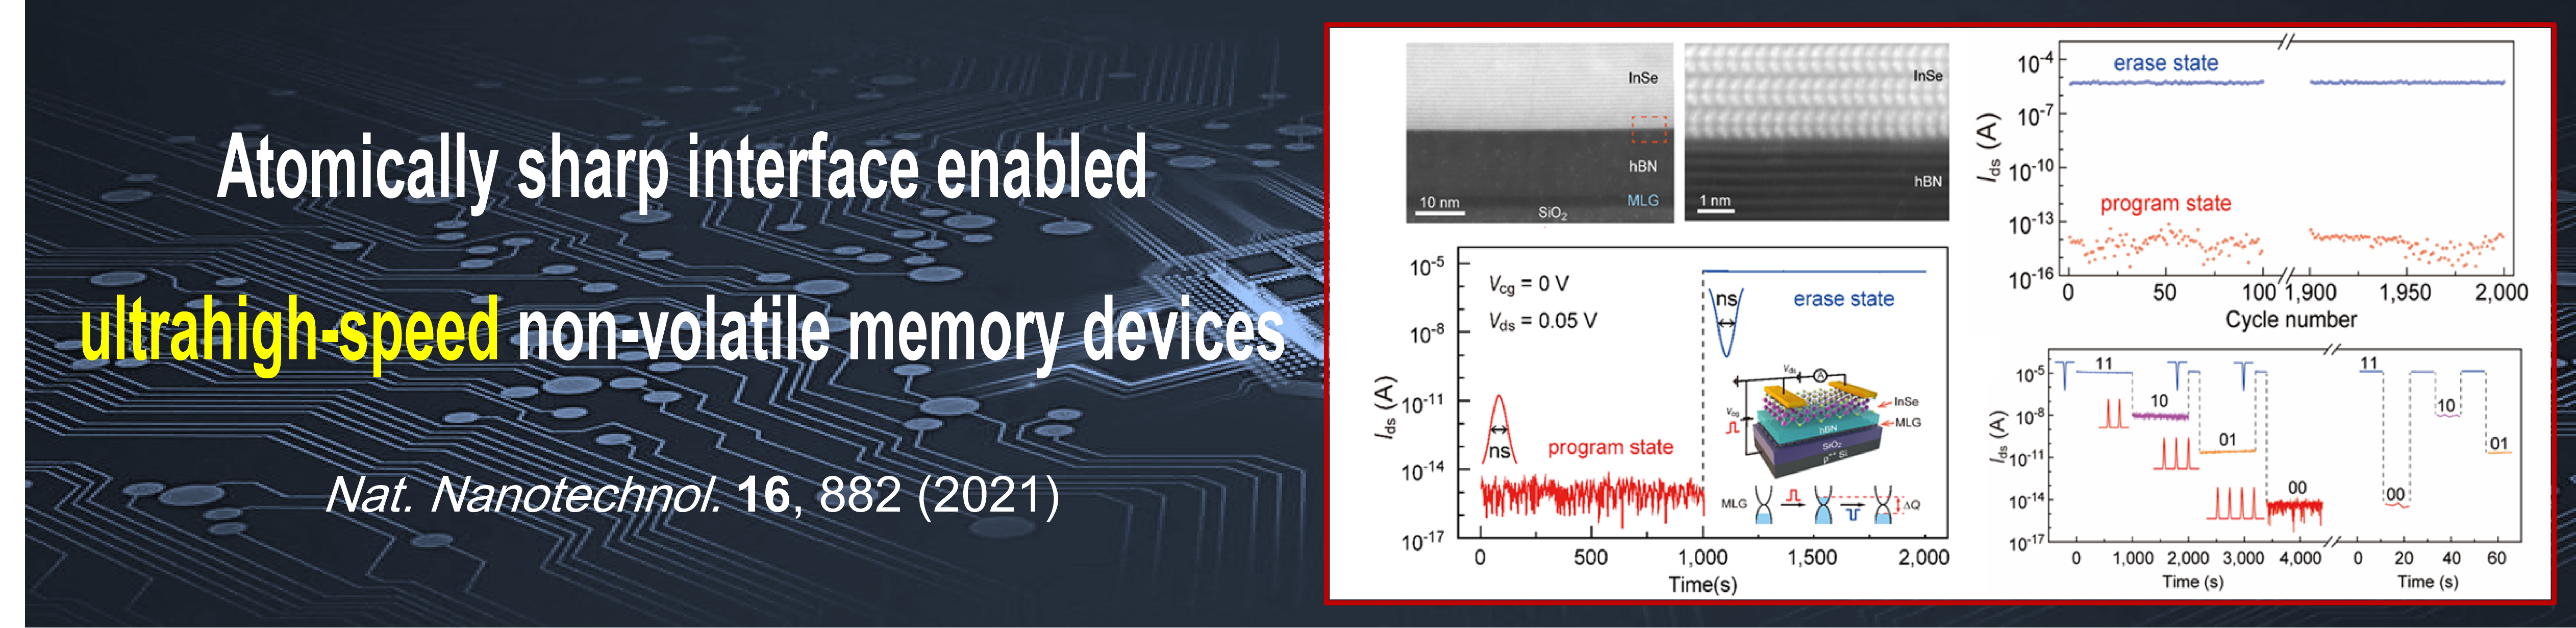 Atomically sharp interface enabled ultrahigh-speed non-volatile memory devices